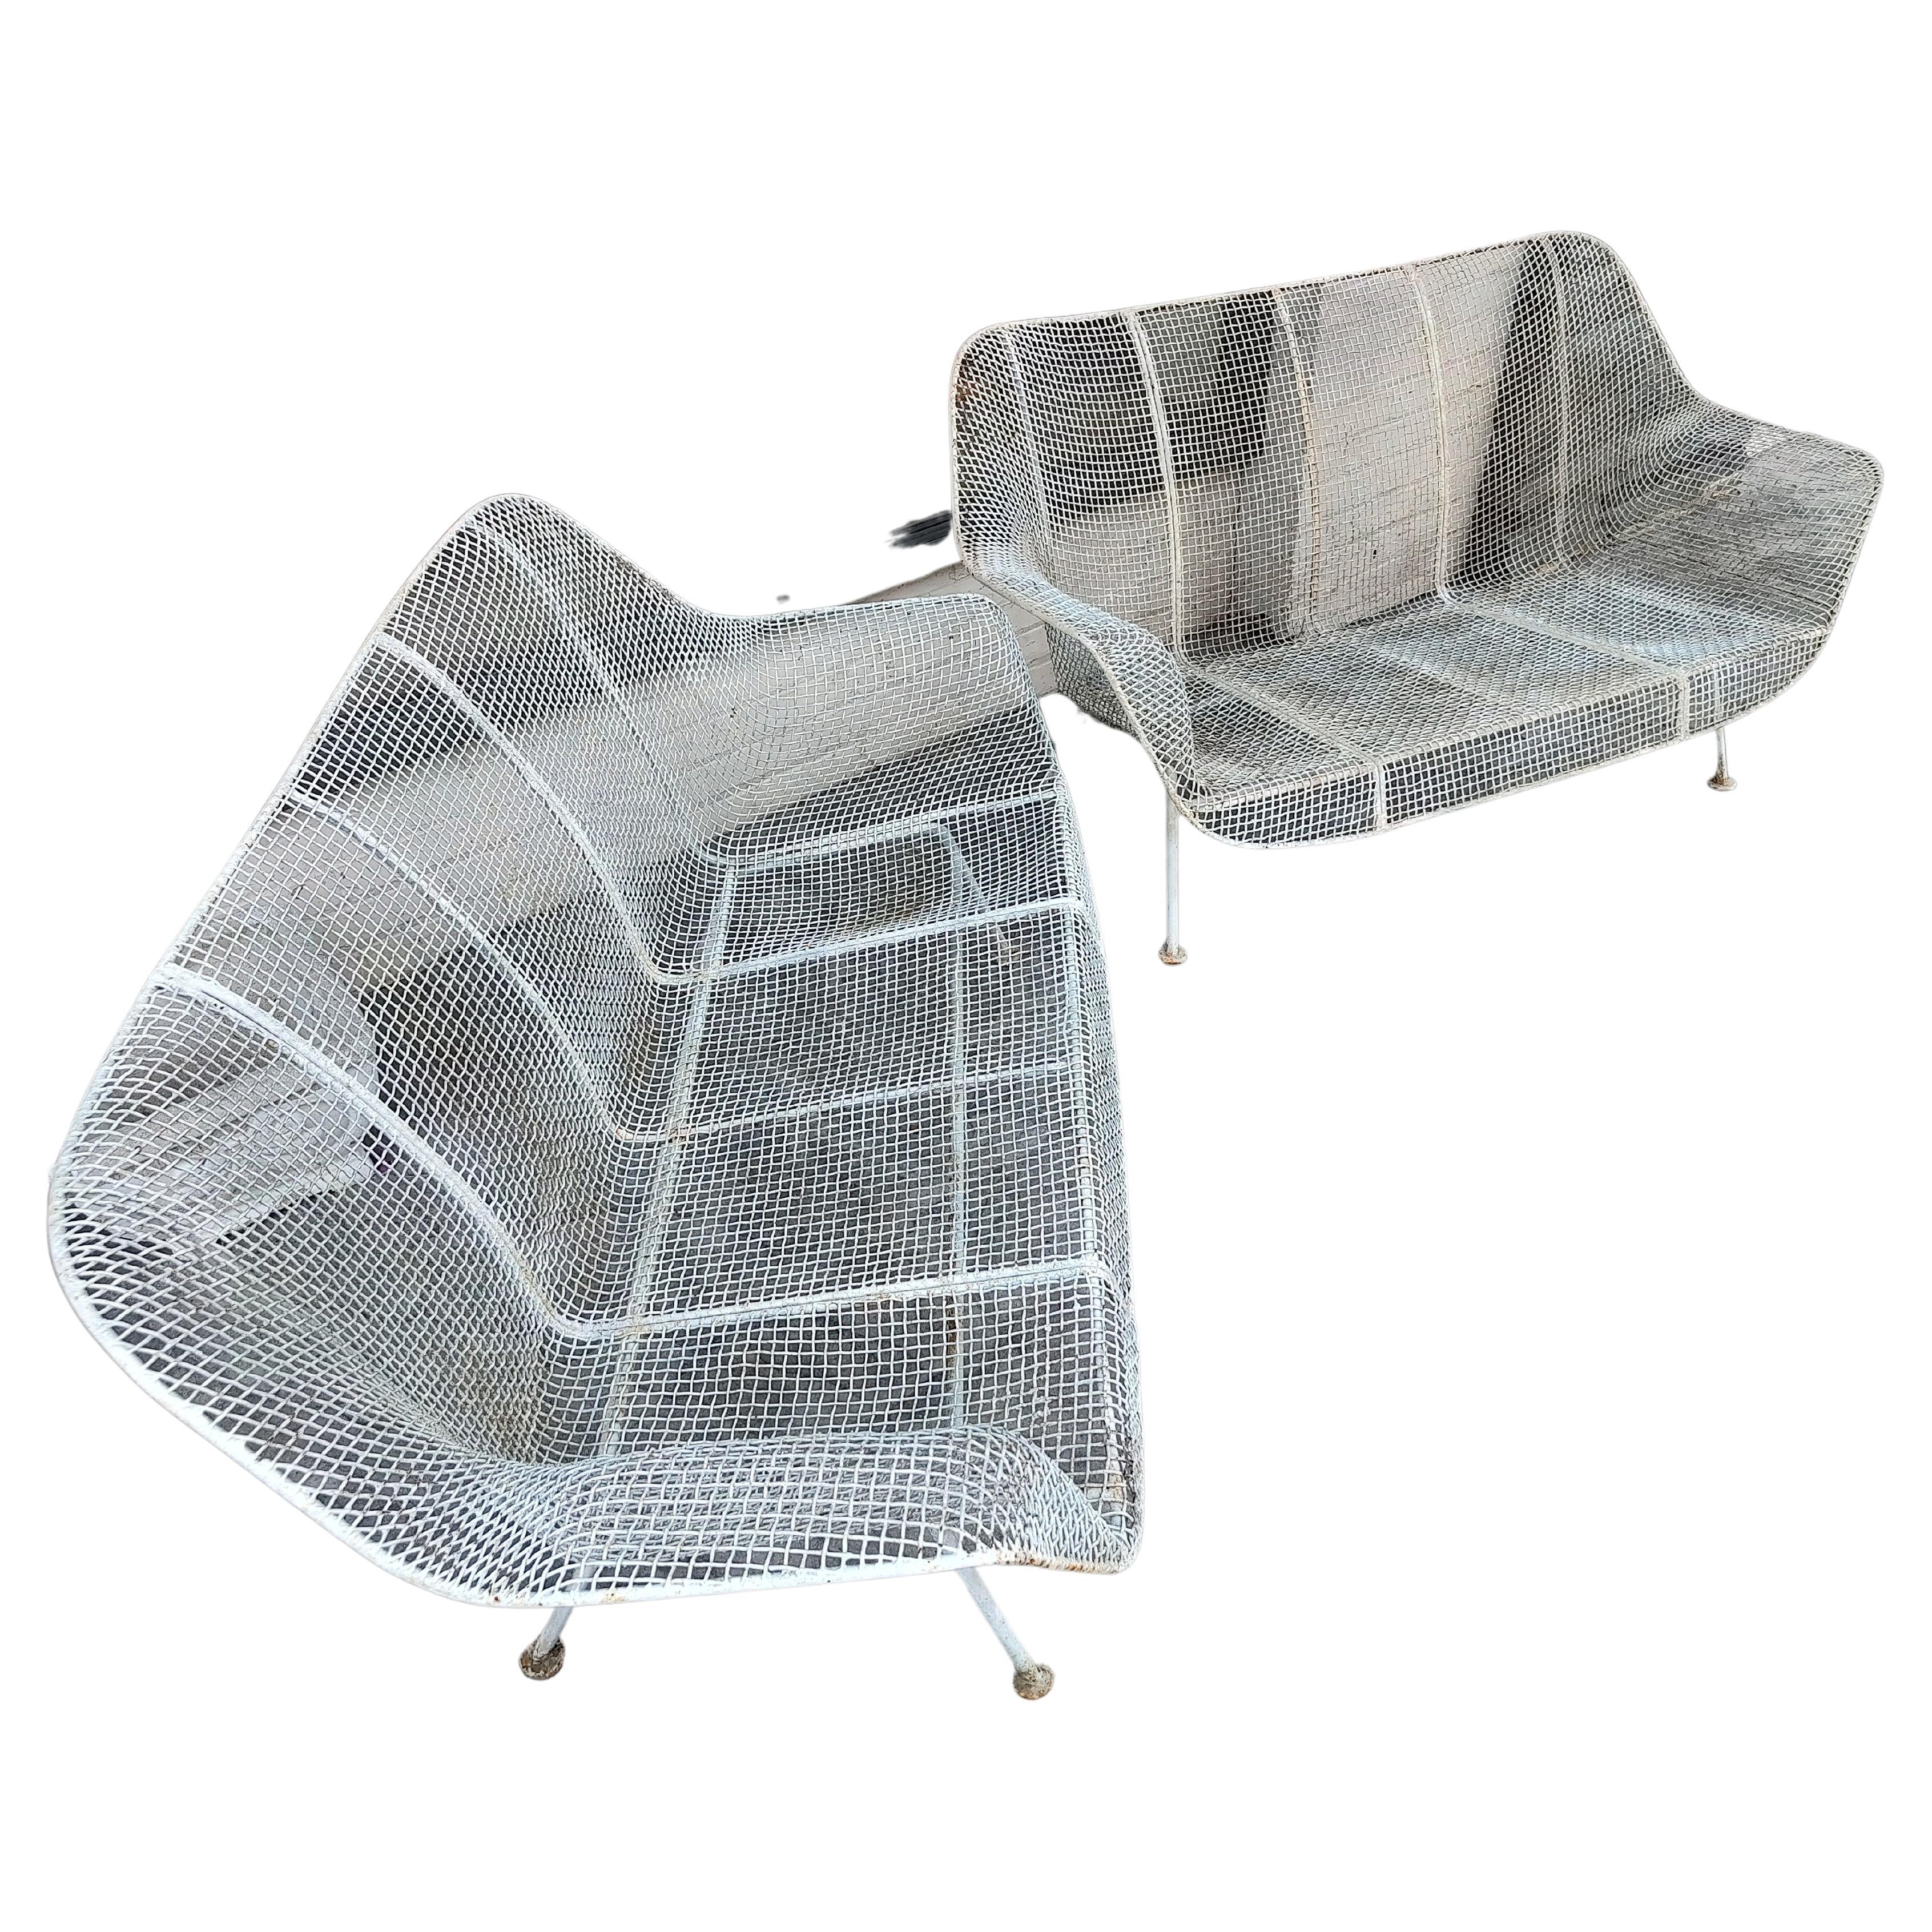 Pair of Mid-Century Modern Sculptura Outdoor Loveseat Lounge Chairs by Woodard For Sale